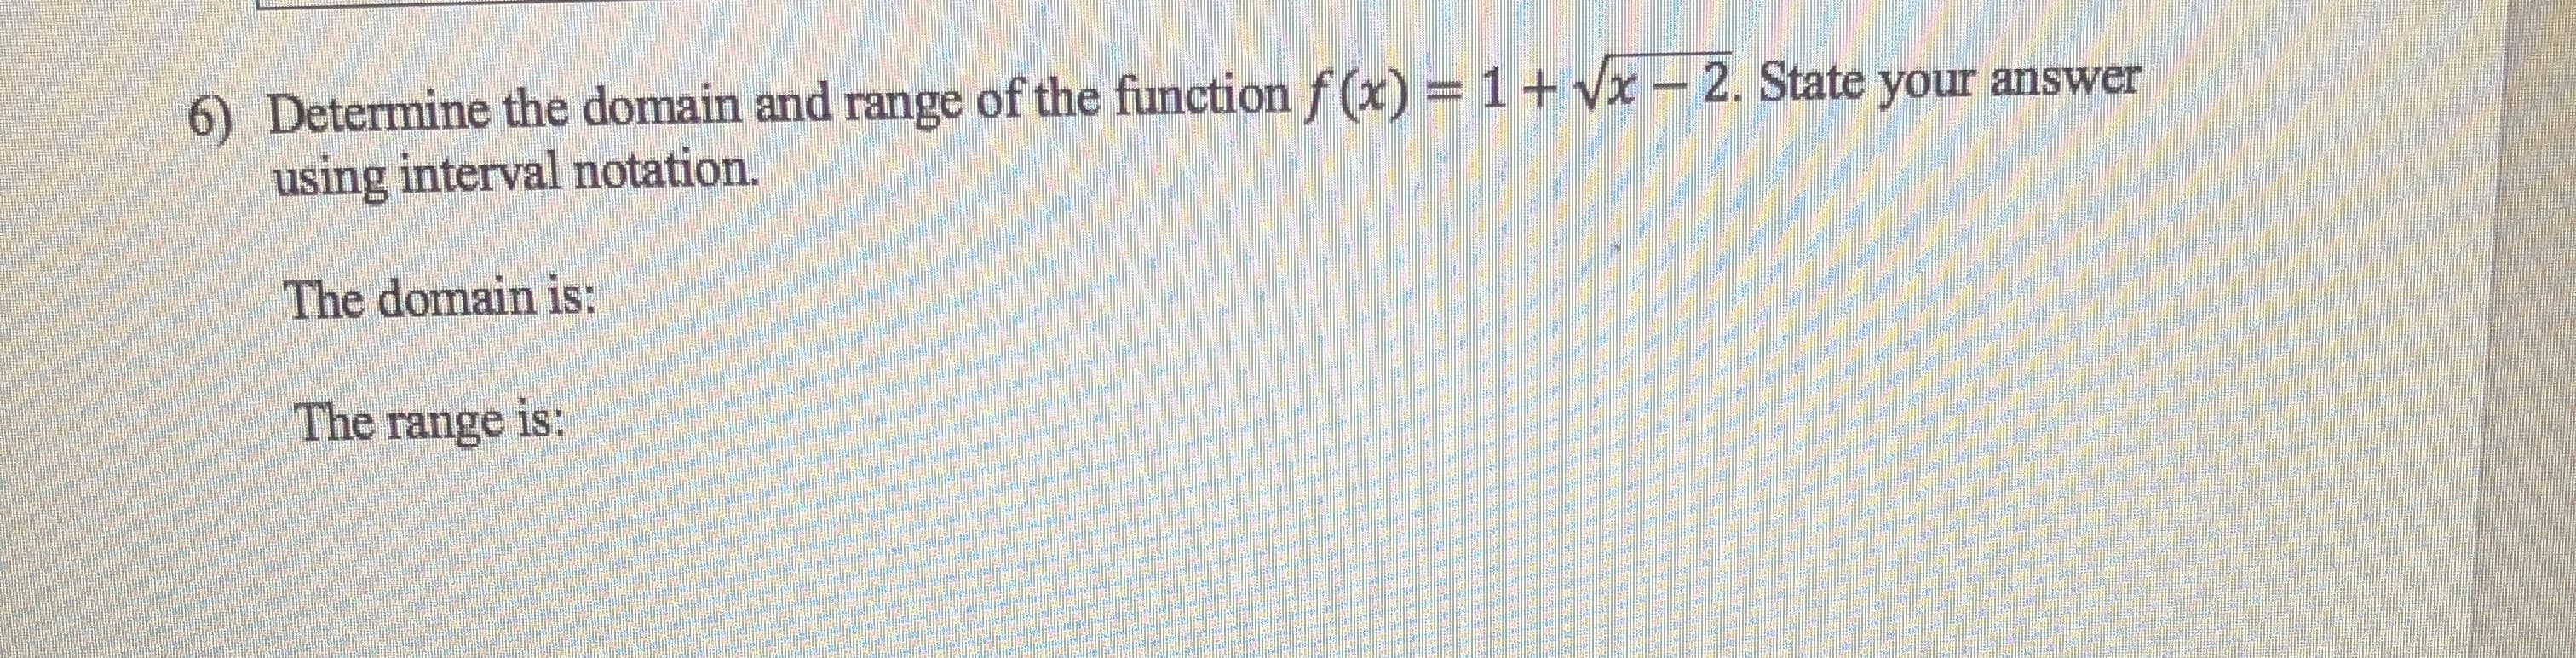 6) Determine the domain and range of the function f(x) = 1+ Vx - 2. State your answer
using interval notation.
The domain is:
The range is:
